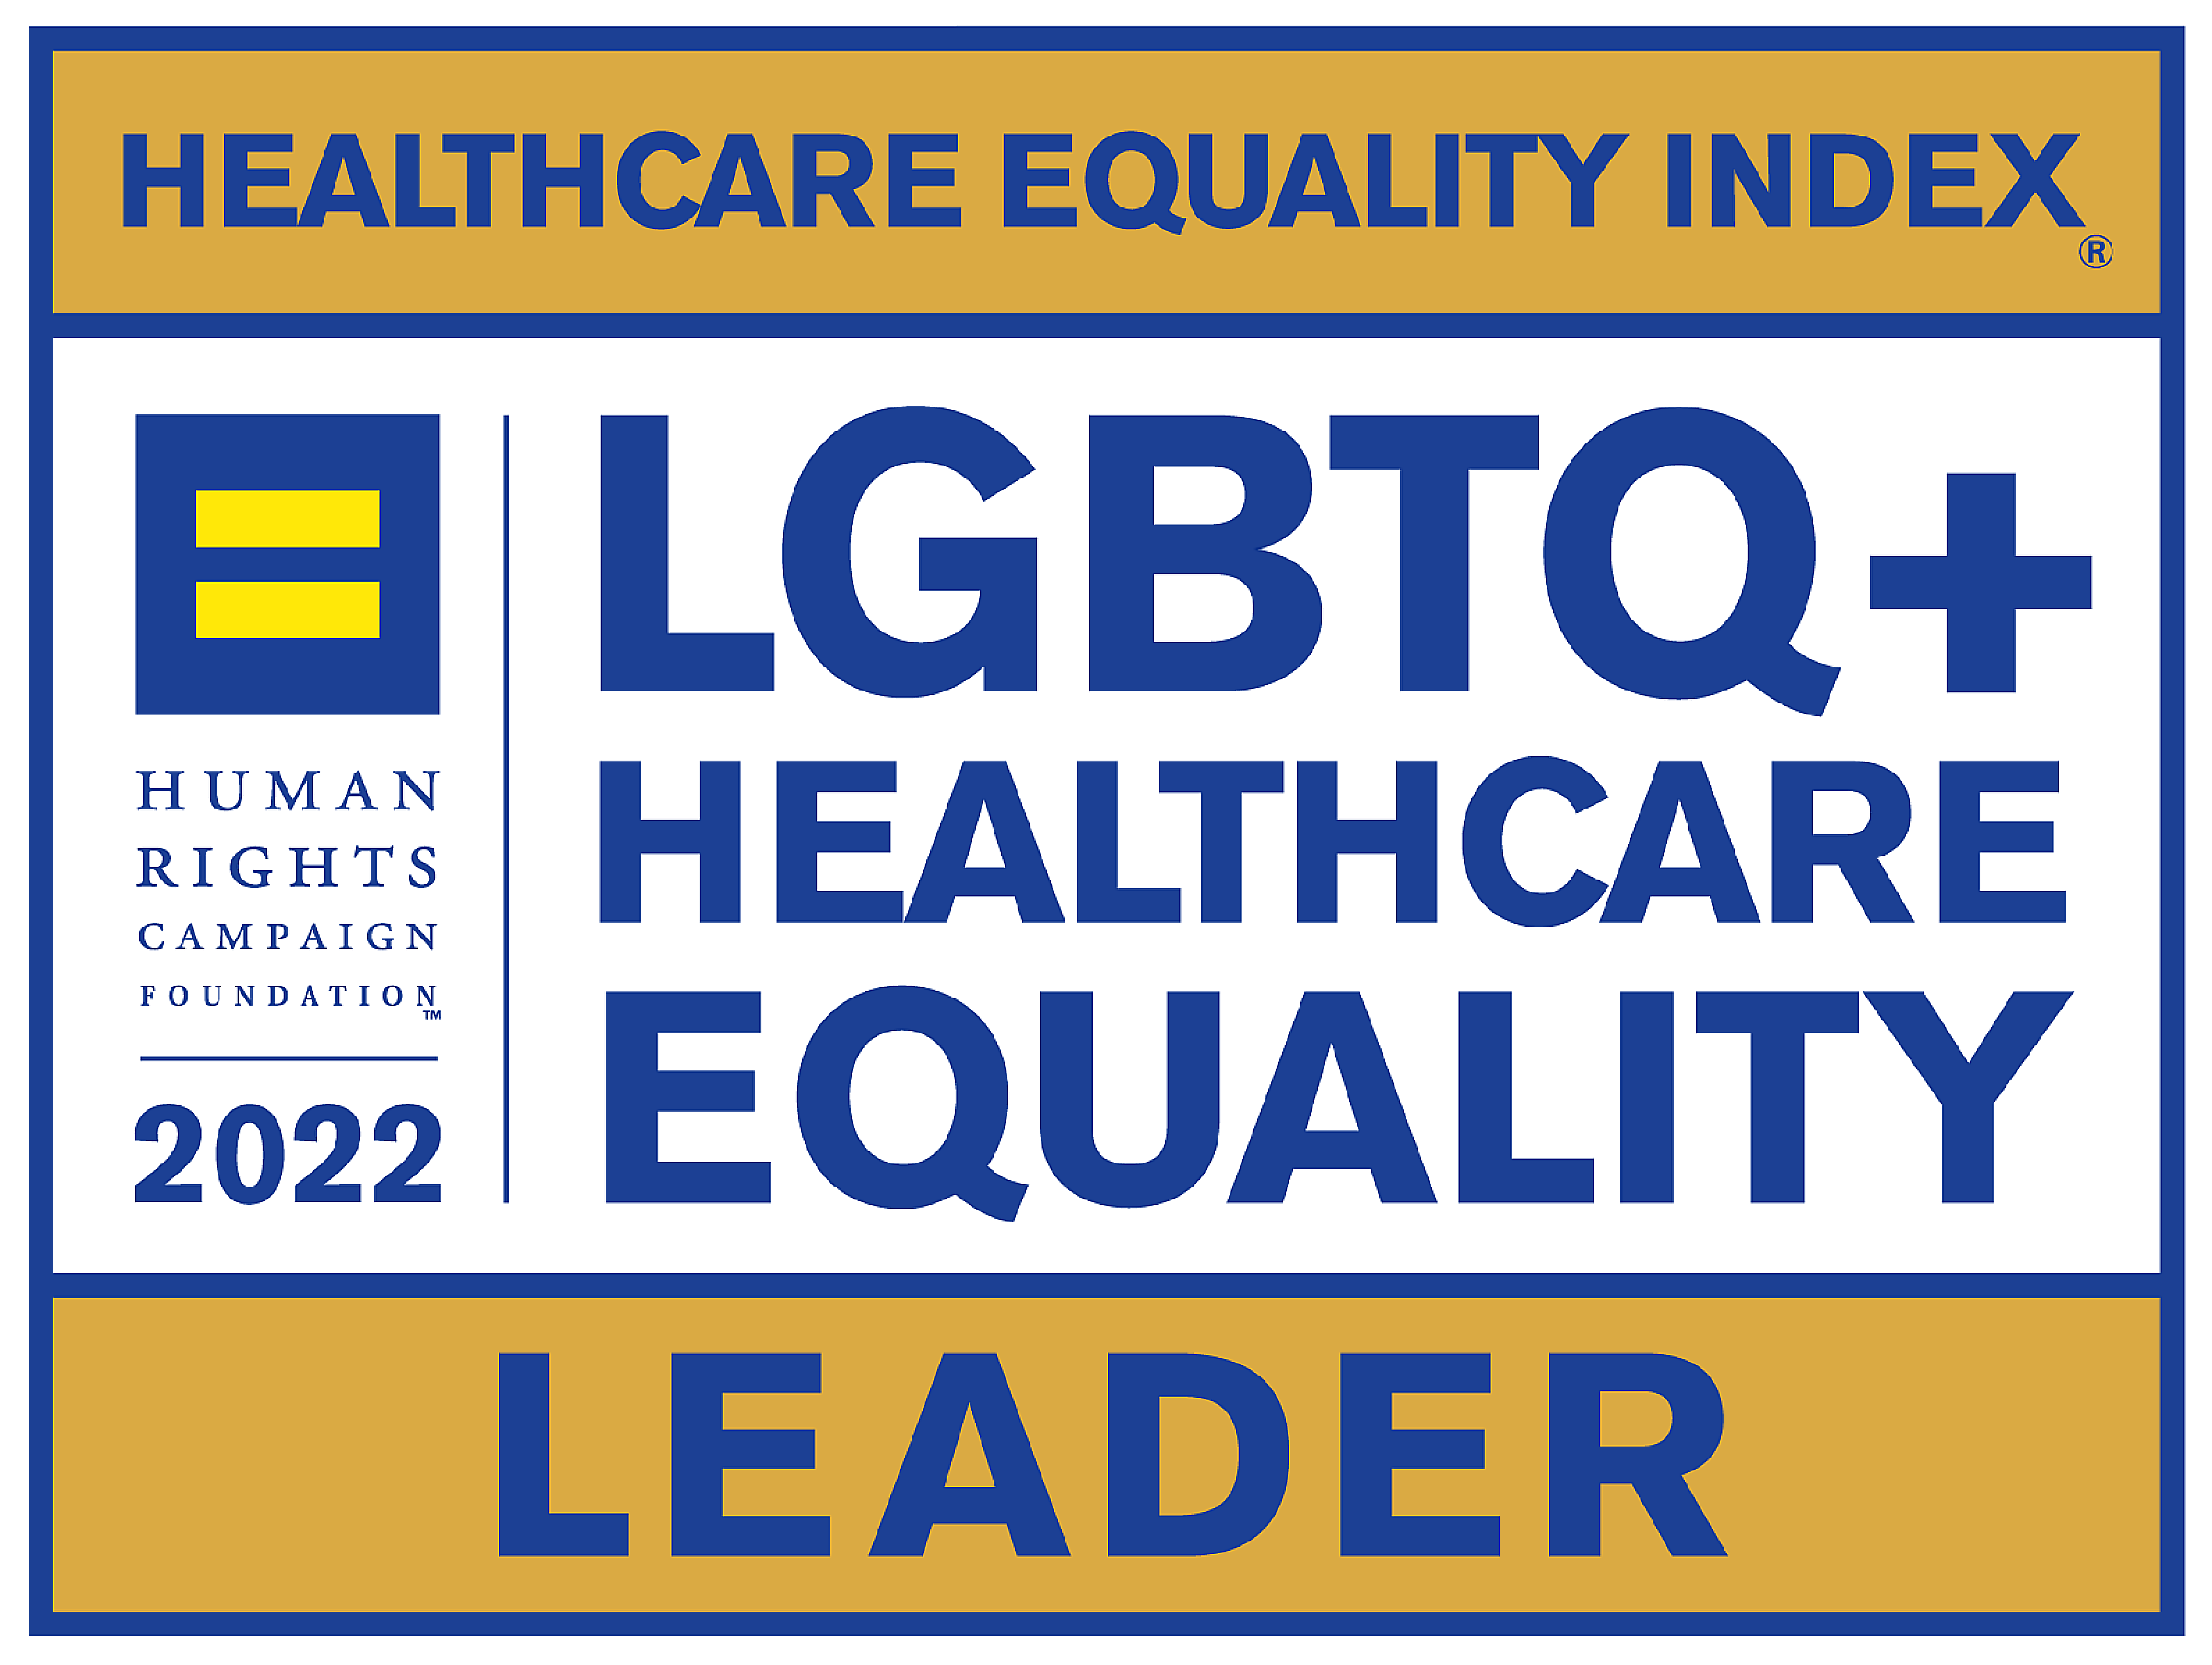 Health Care Equality Index 2022